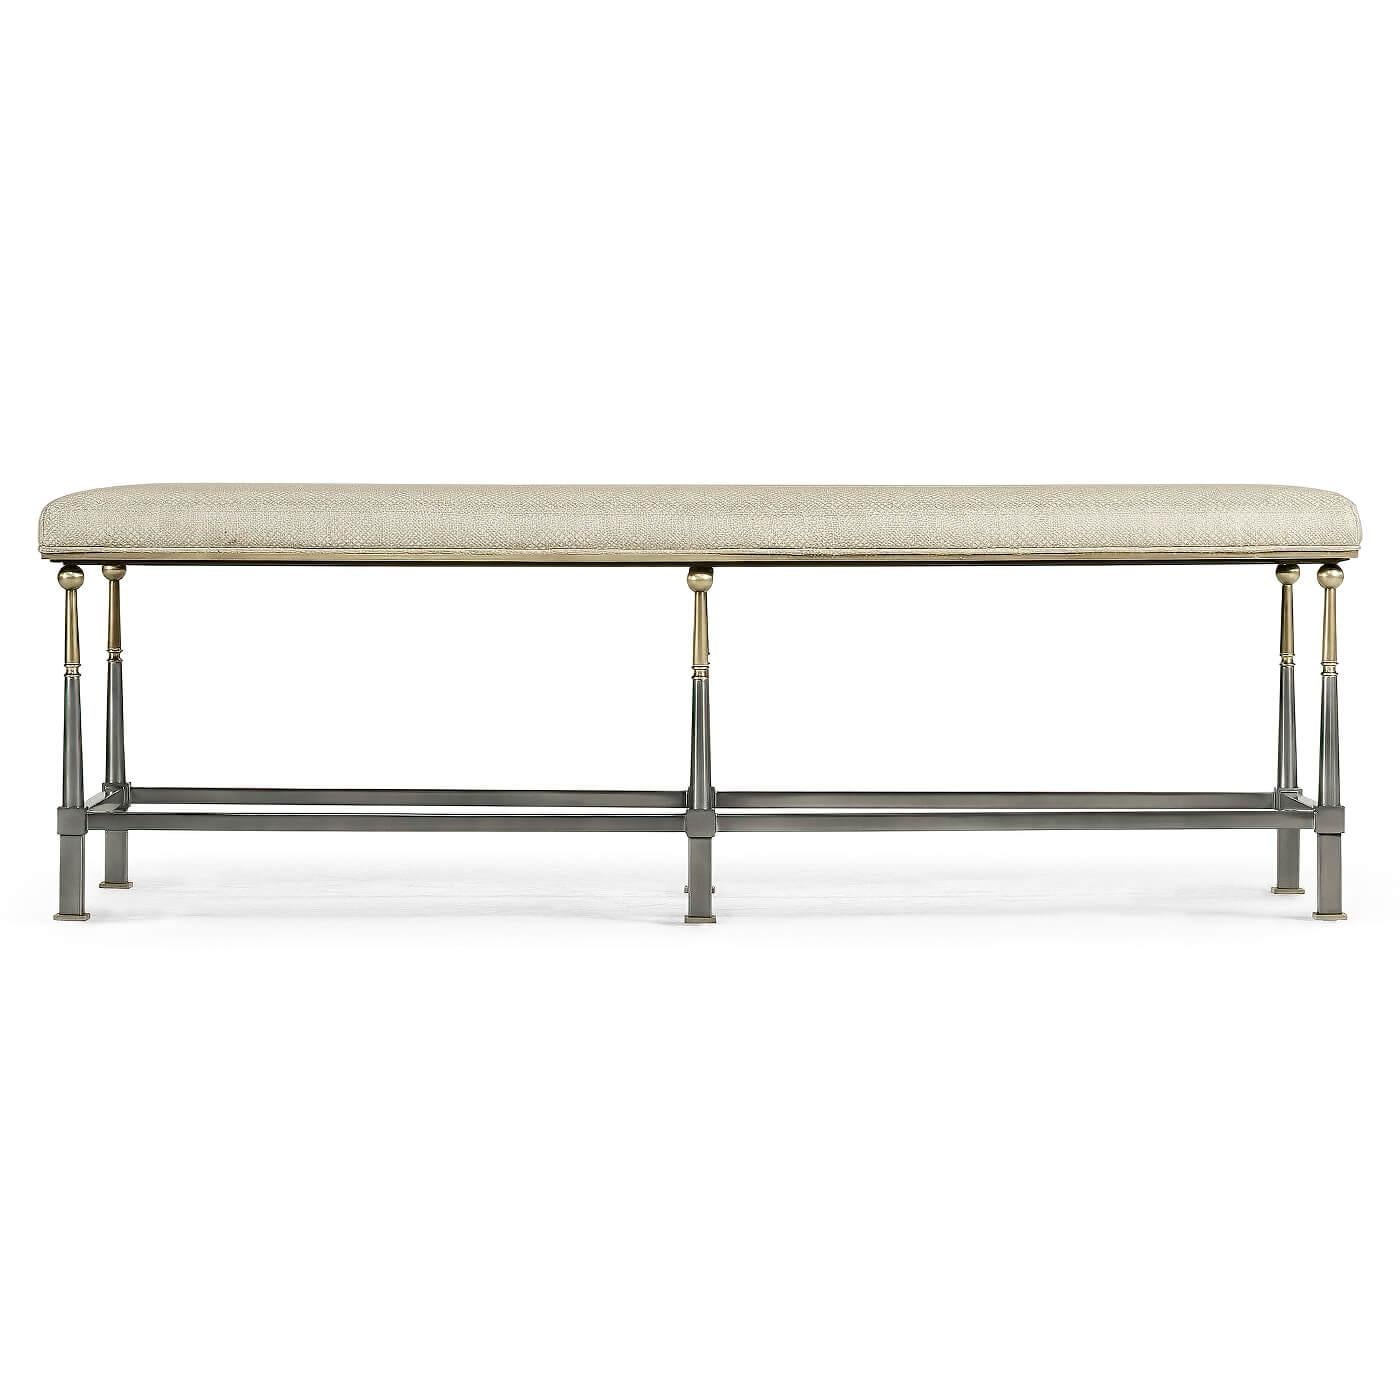 Mid-Century Modern bench A French modern gunmetal and brass finish banquette with pyramidal tapered supports and stretcher.

Dimensions: 56.25